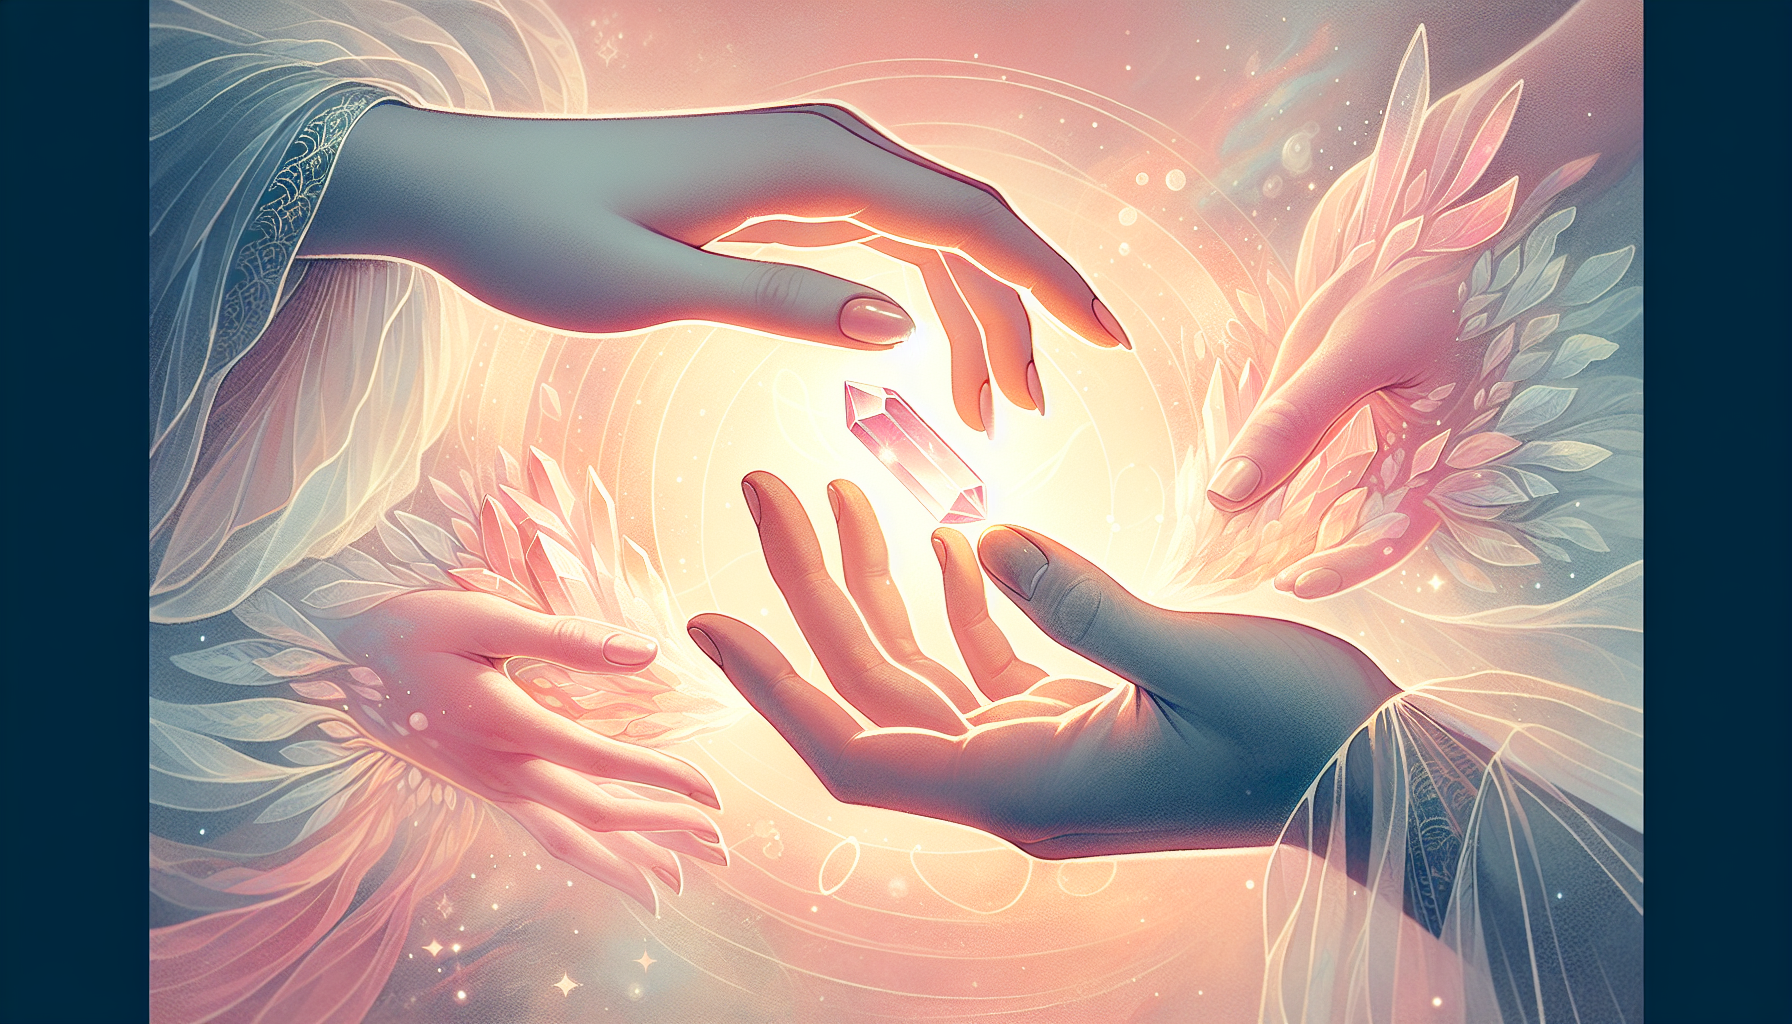 Illustration of two hands exchanging a rose quartz crystal symbolizing love and friendship